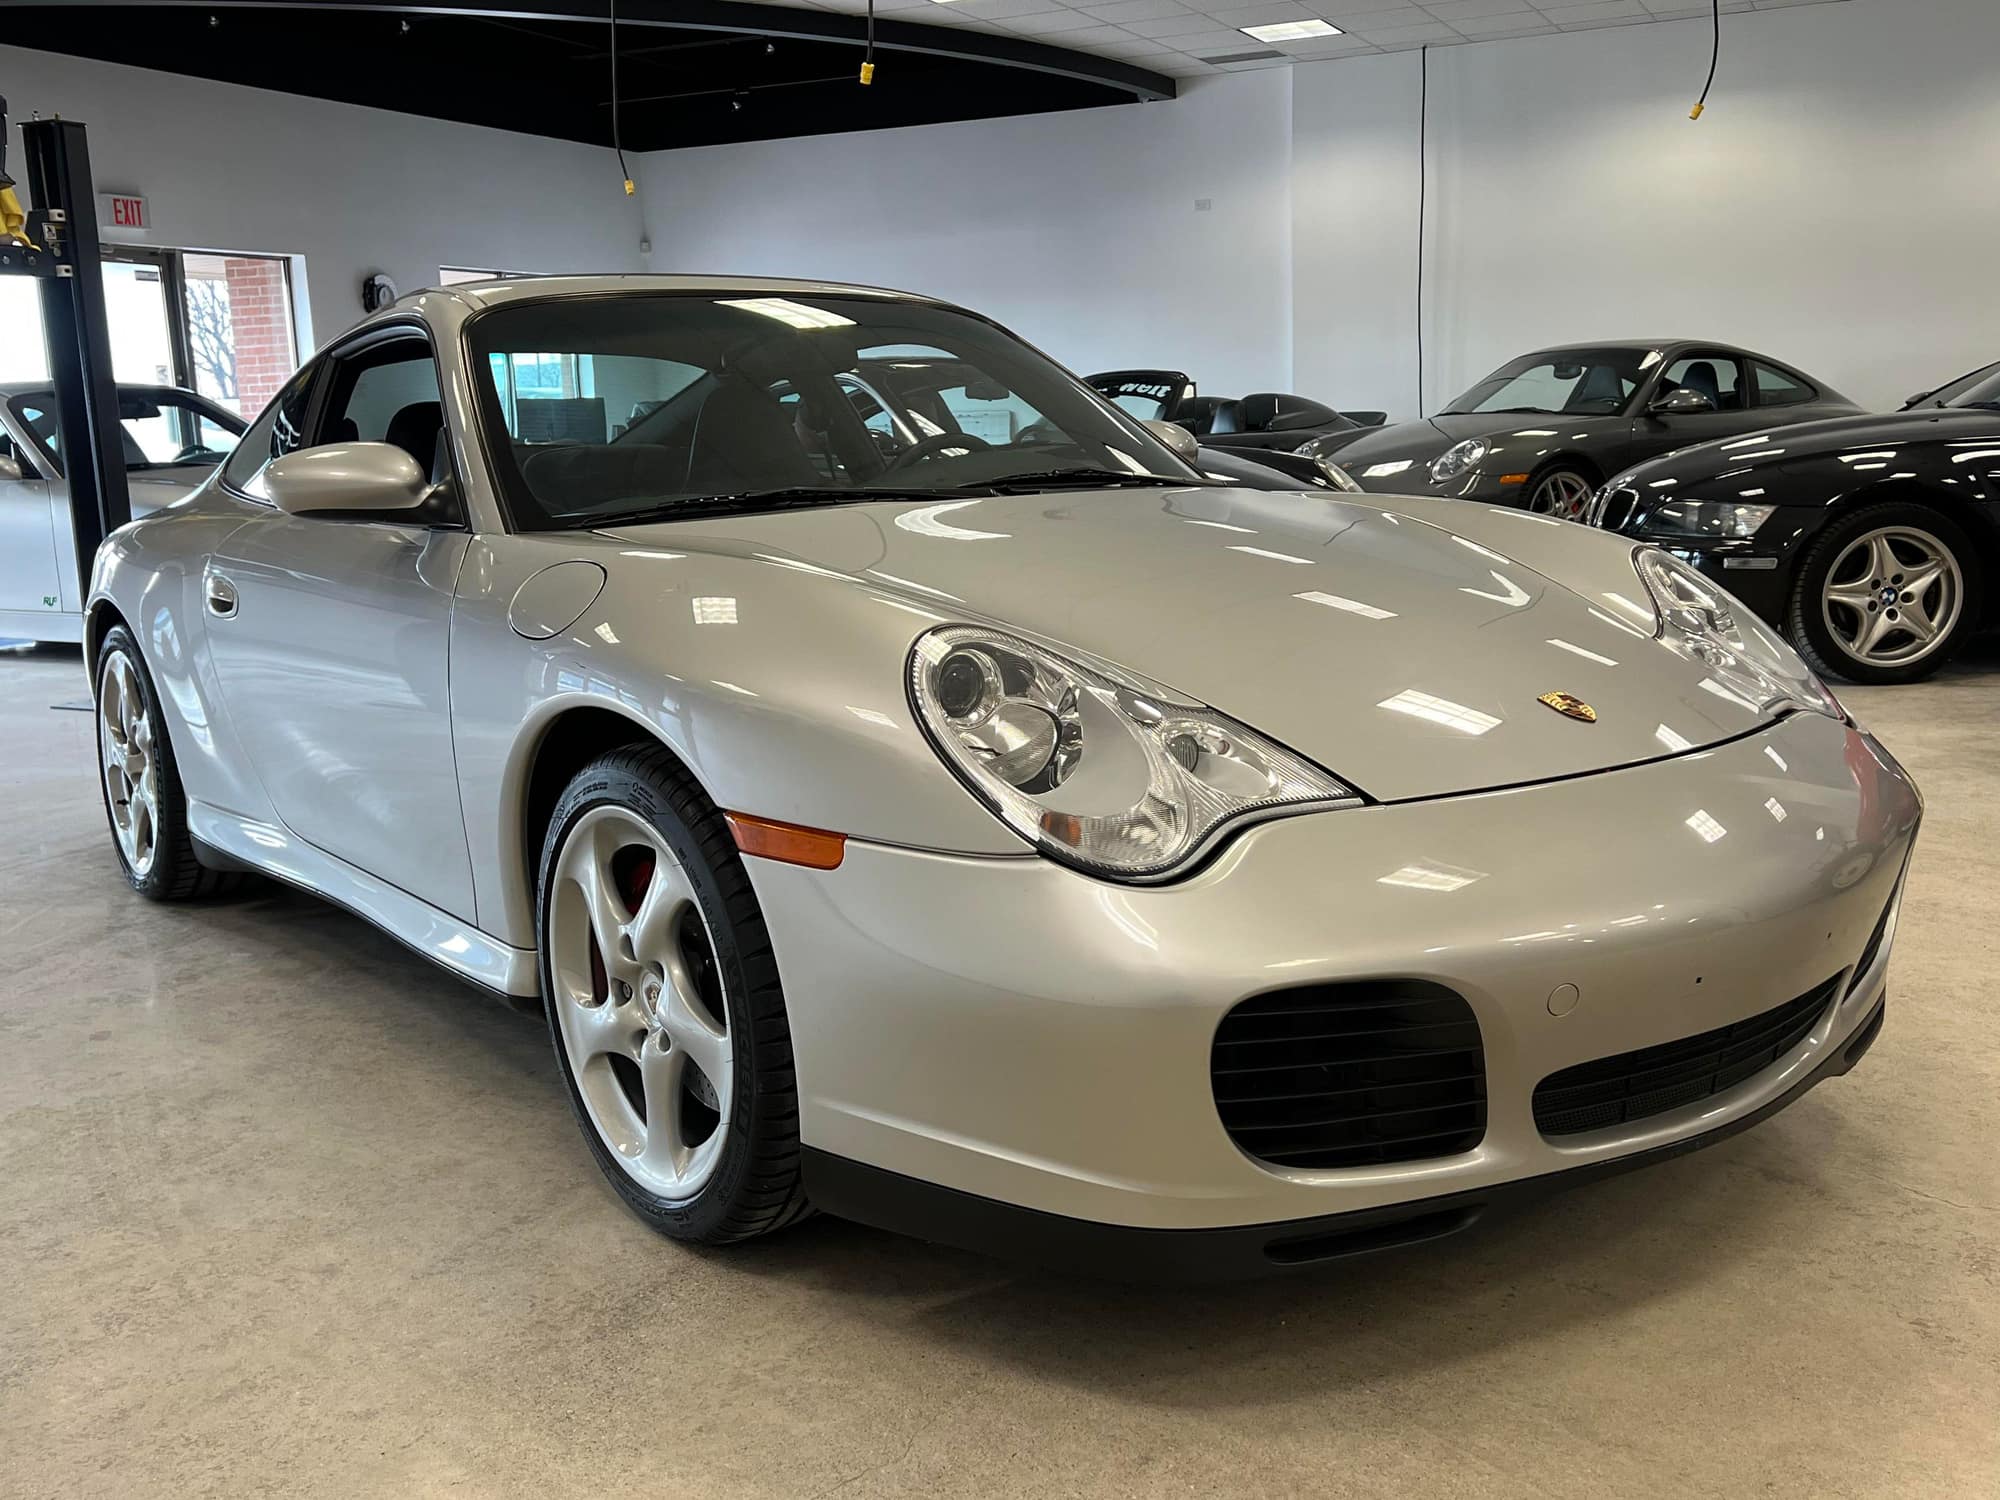 2002 Porsche 911 - 2002 Porsche 911 (996) Carrera 4S - 6-speed - 22k miles - Sport Seats/Sport Exhaust - Used - VIN WP0AA29982S623453 - 22,100 Miles - 6 cyl - AWD - Manual - Coupe - Silver - Detroit, MI 48236, United States